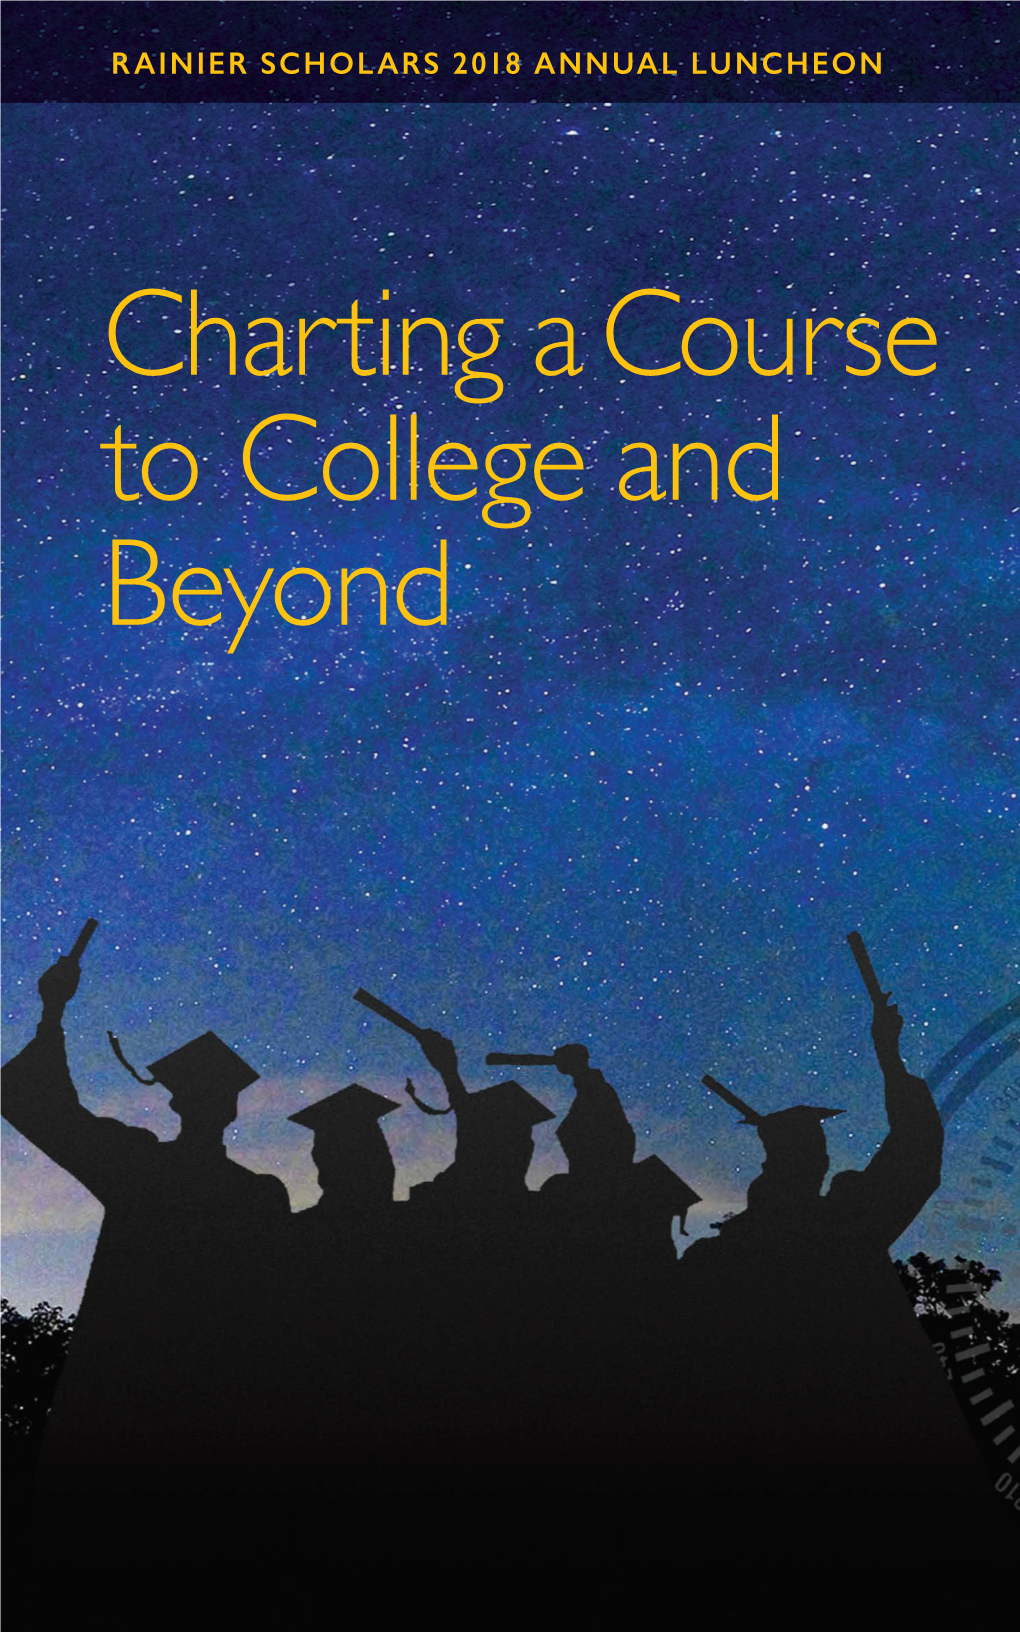 Charting a Course to College and Beyond